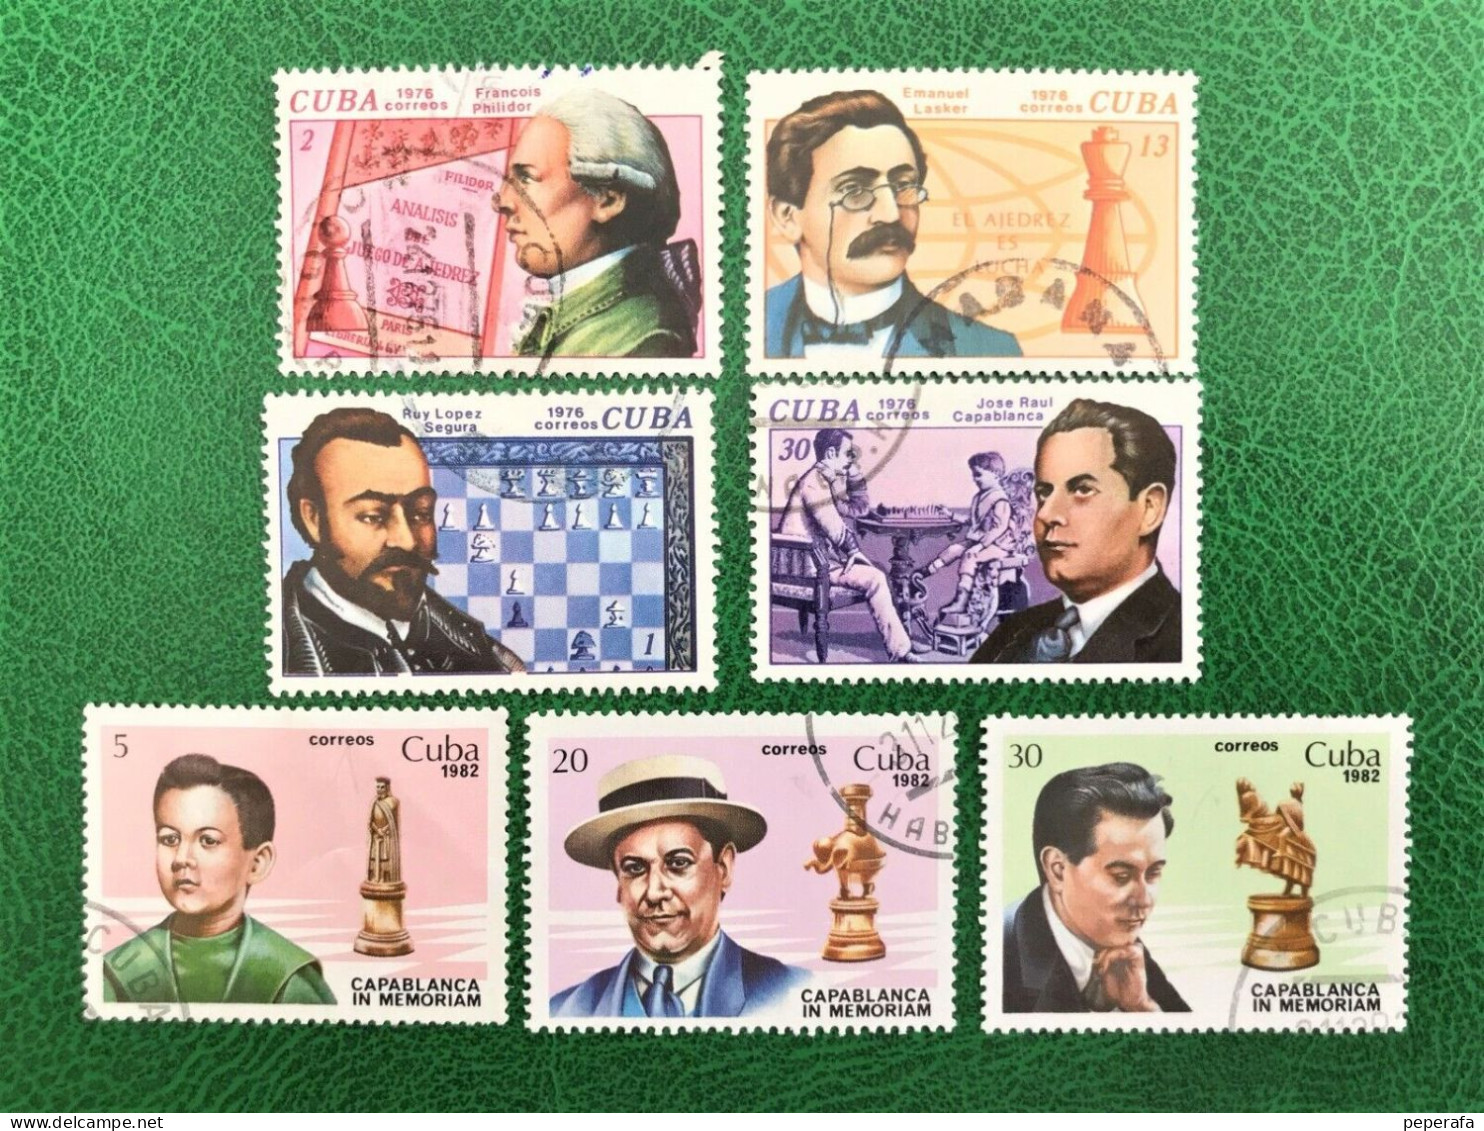 CUBA Capablanca, COLLECTION Ajedrez Chess, USED - Used Stamps